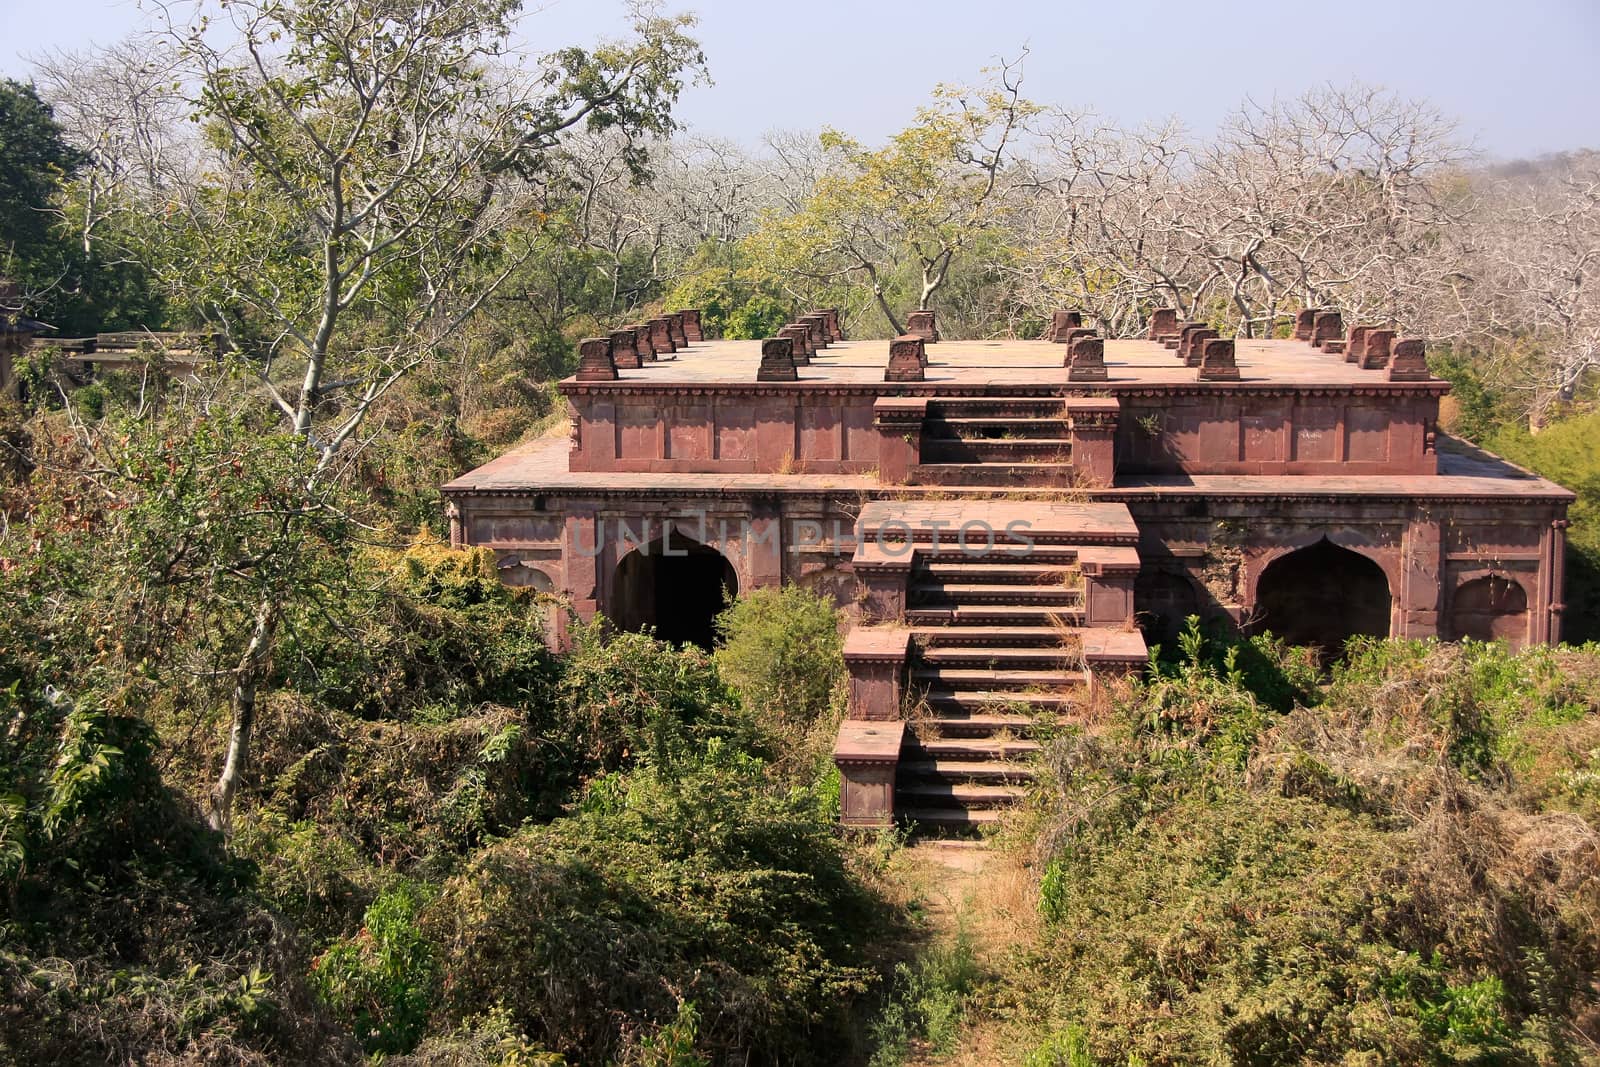 Old building surrounded by trees, Ranthambore Fort, India by donya_nedomam